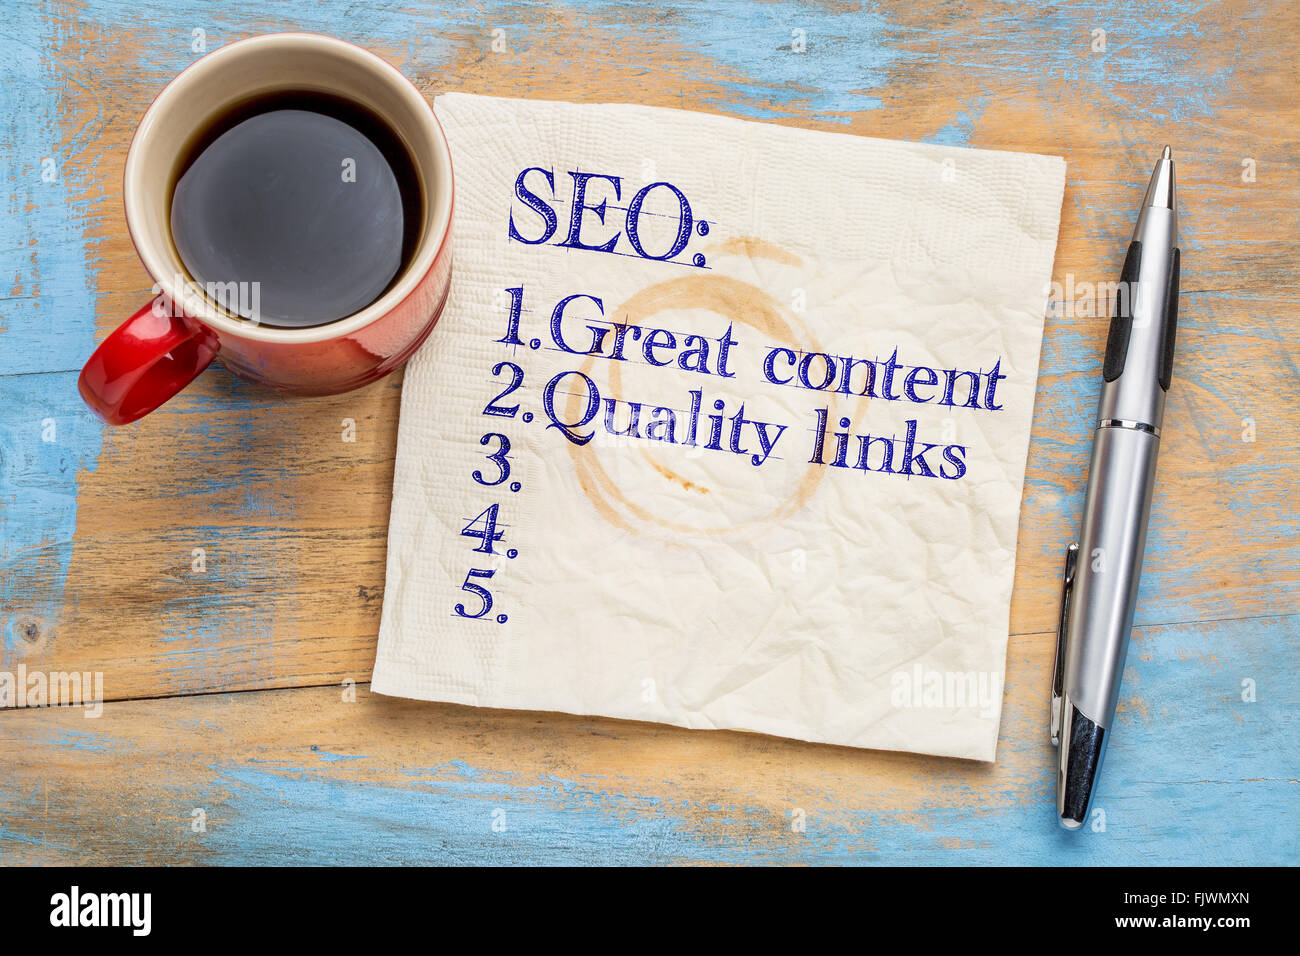 SEO (search engine optimization) tips (great content and quality links) on napkin with a cup of coffee Stock Photo